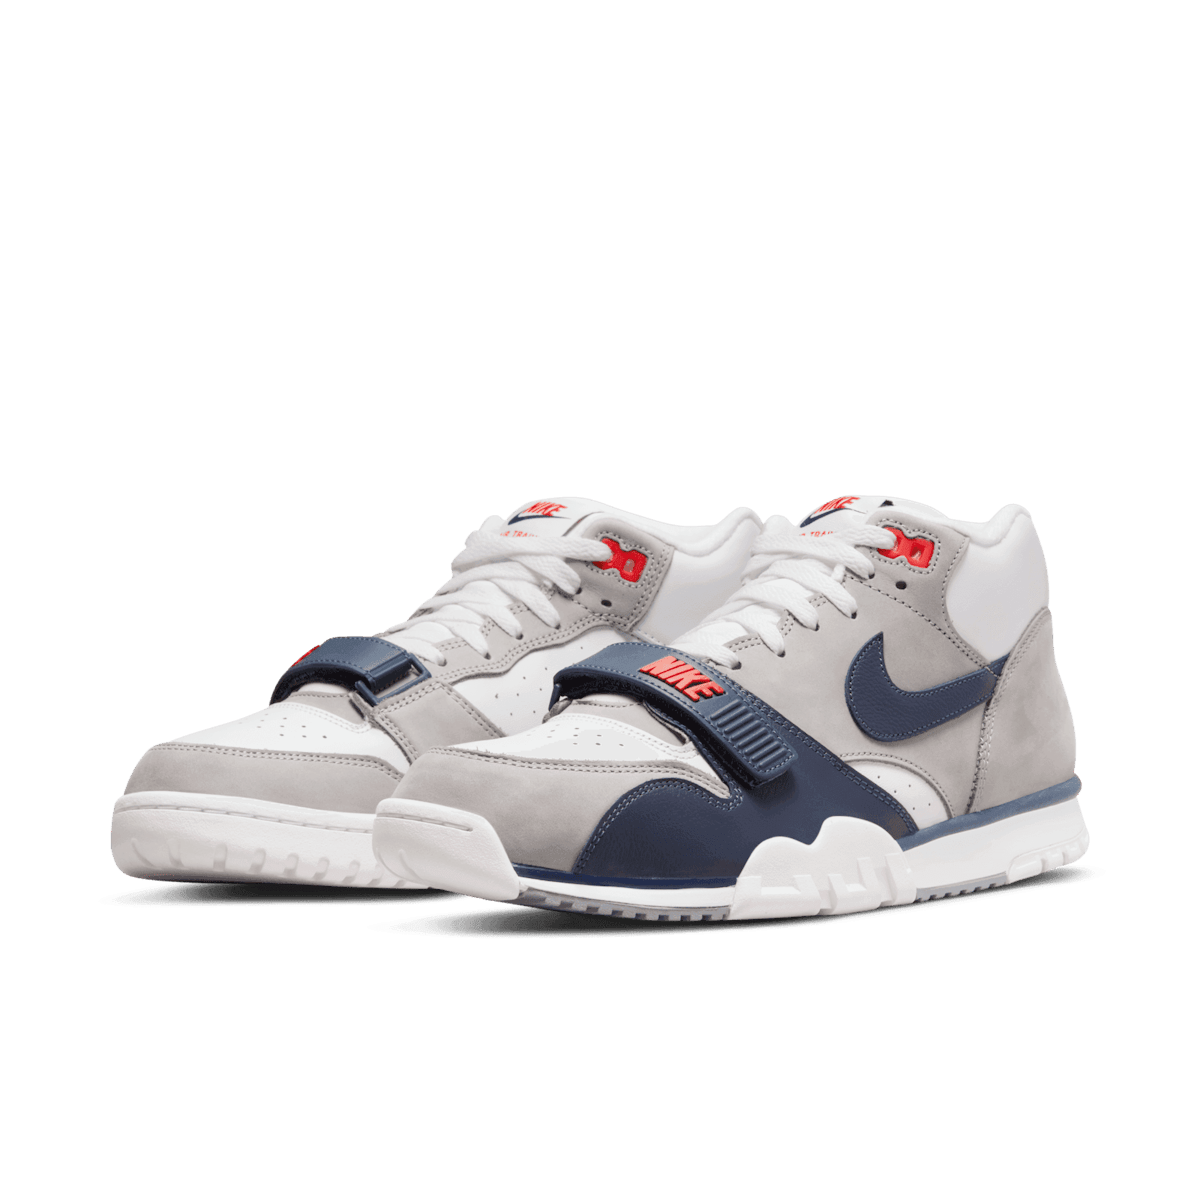 Nike Air Trainer 1 Midnight Navy Angle 2